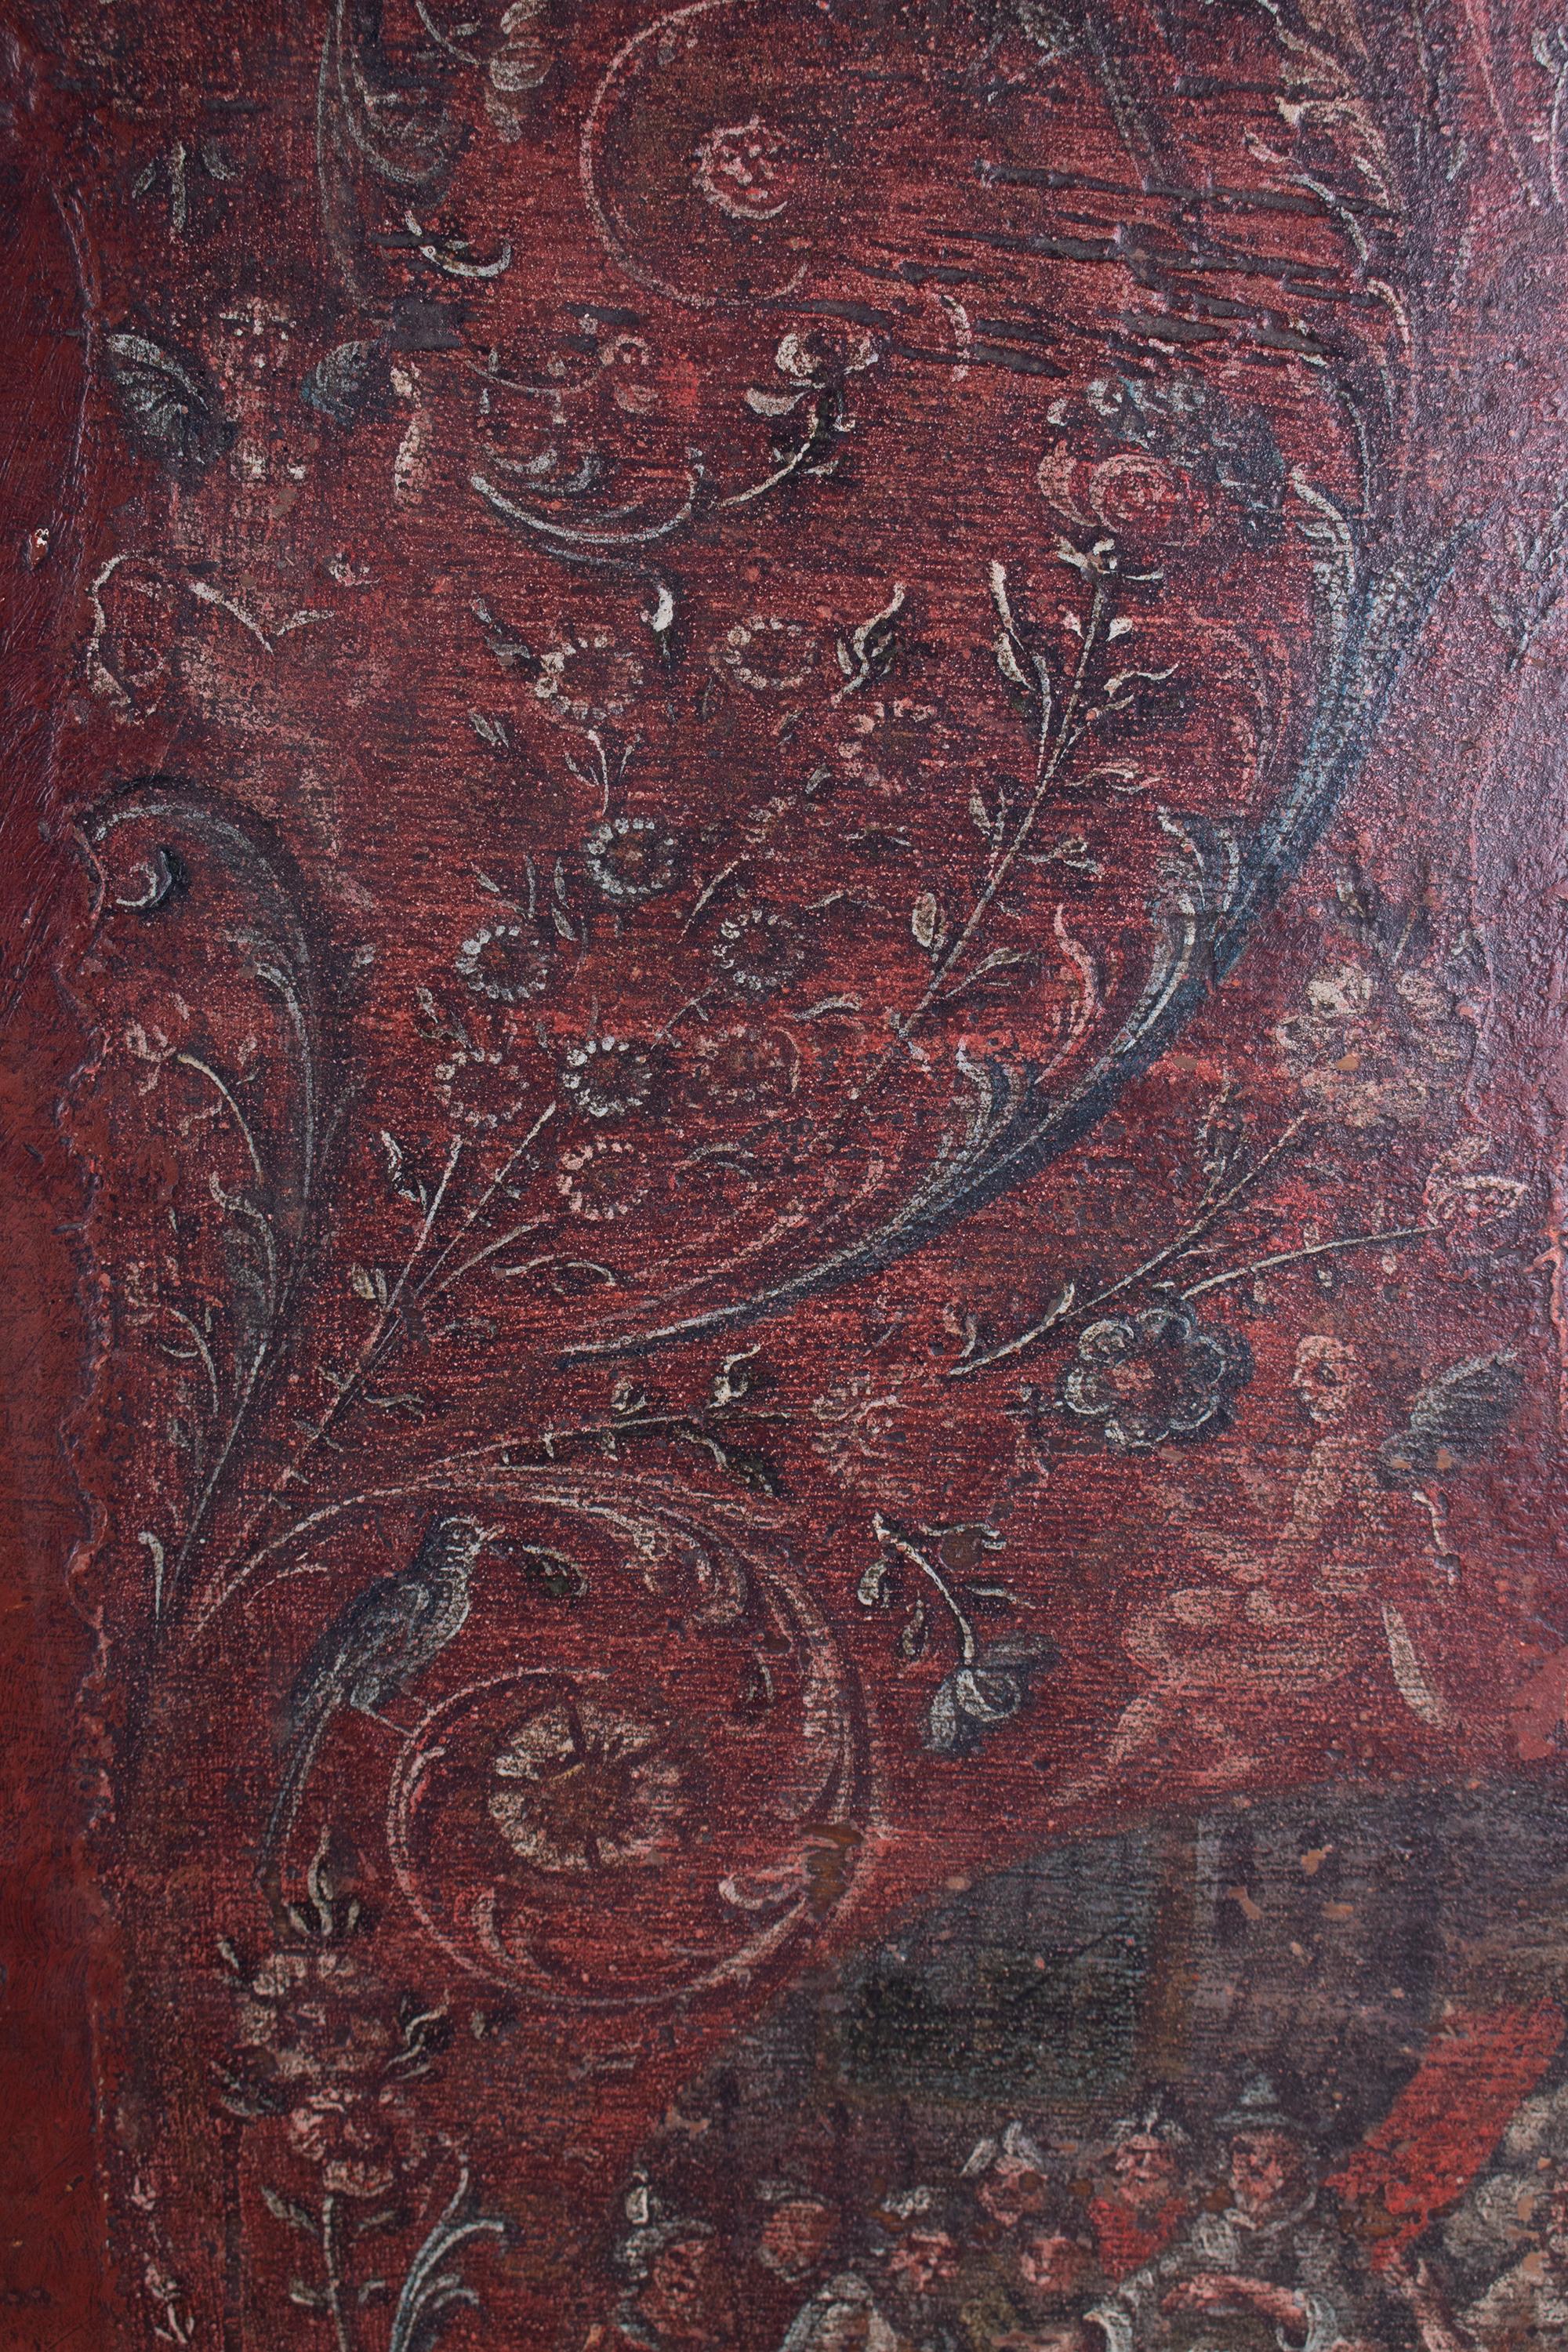 Three-Legged Painted Table with People and Flower Motifs, 17th Century, Italian 1